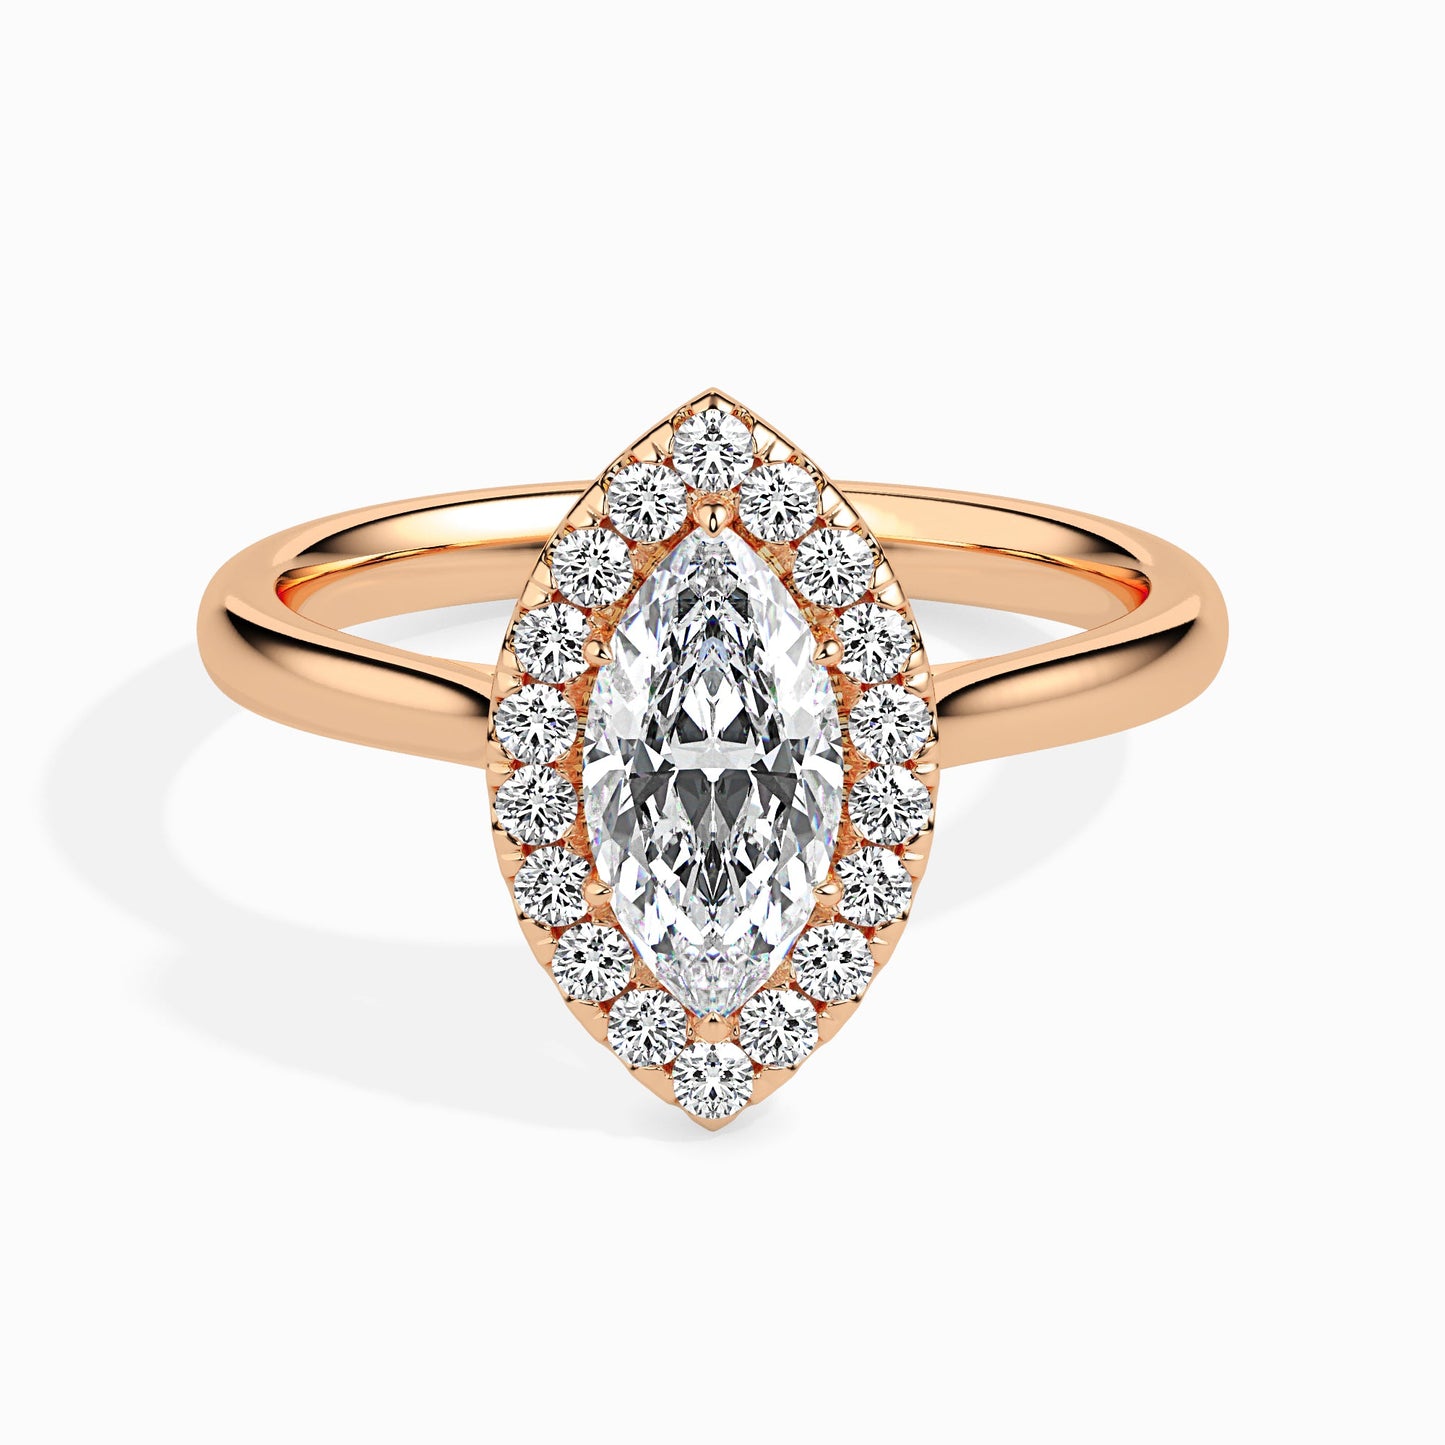 Solitaire Engagement Diamond Ring in 18 karat Rose Gold by Fiona Diamonds